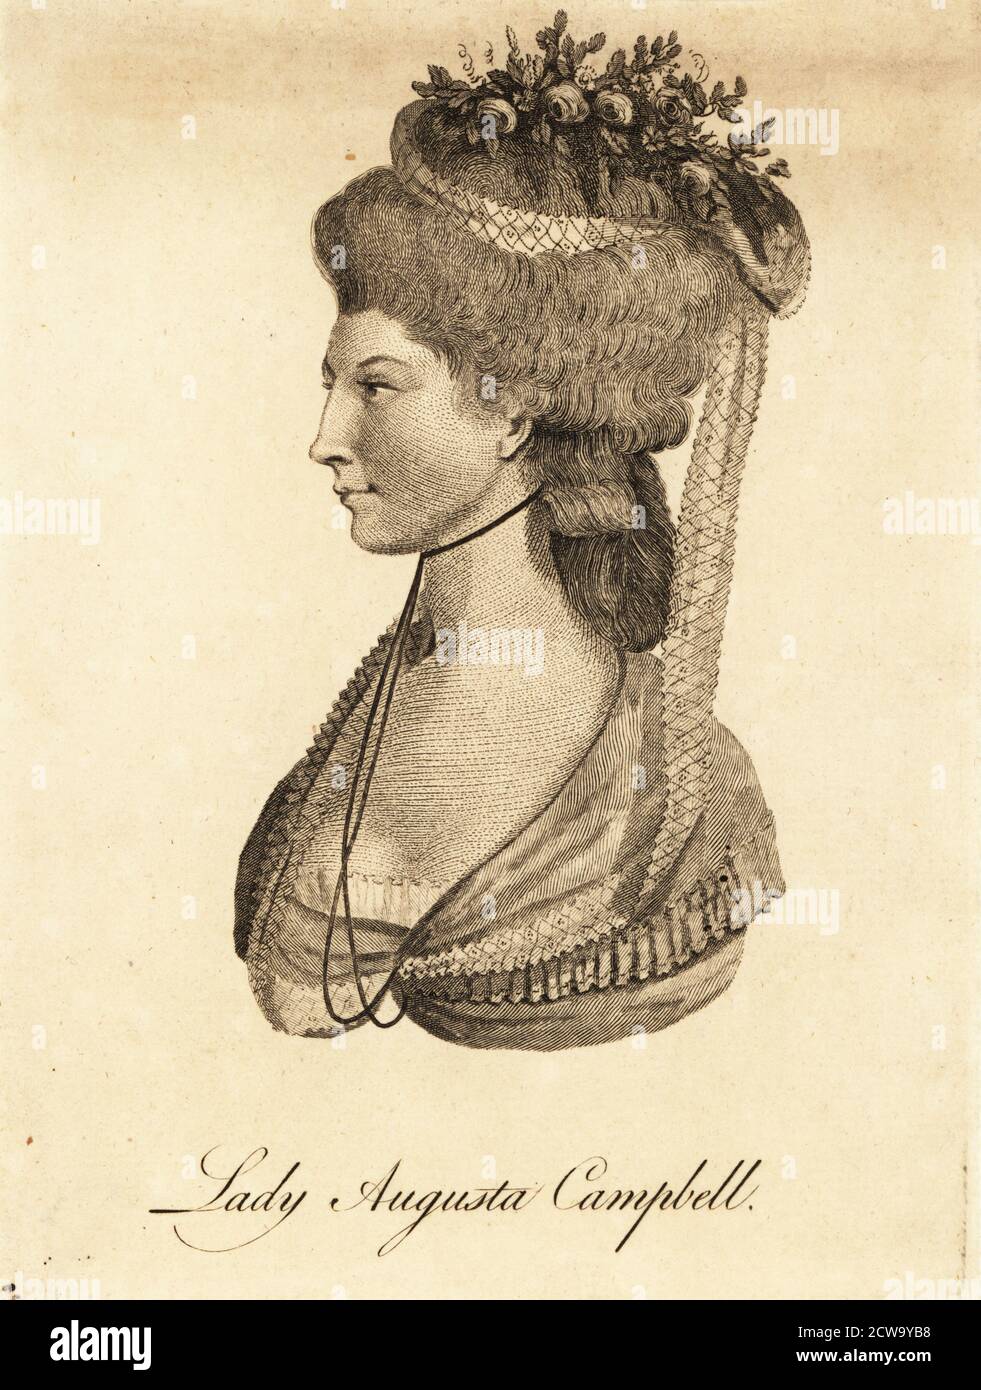 Lady Augusta Campbell (1760 - 1831), daughter of John Campbell , 5th Duke of Argyll, wife of notorious gambler Colonel Henry Mordaunt Clavering. With ribbon and garland of flowers in her hair, choker necklace, fichu and shawl. Copperplate engraving by unknown artist published for the London Magazine, June 1782. Stock Photo